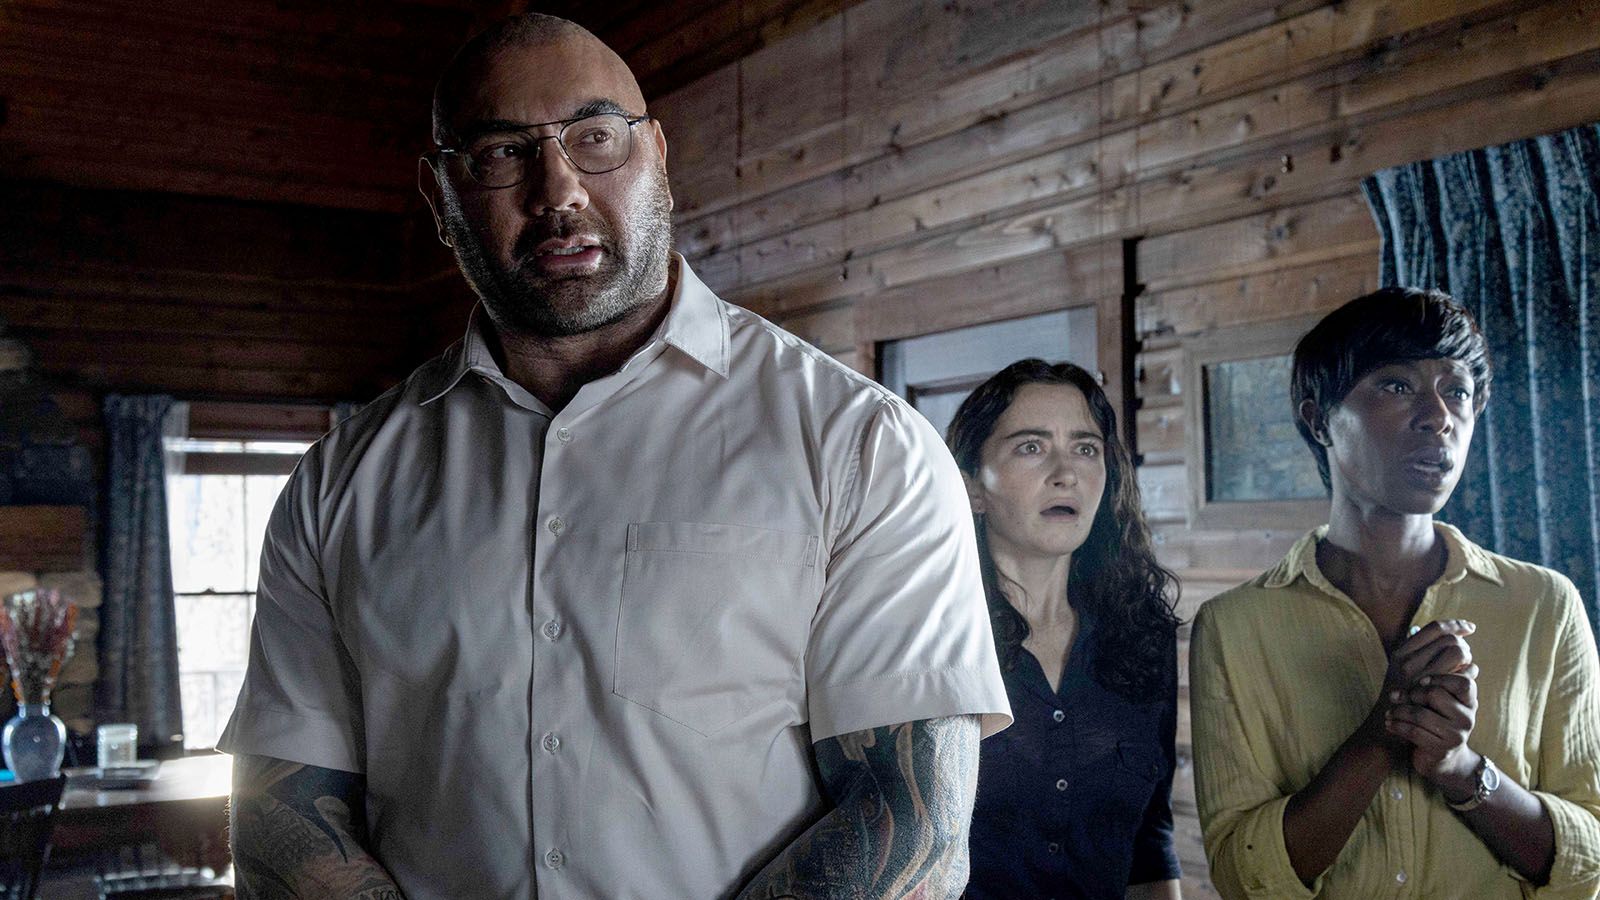 Knock at the Cabin stars, from left, Dave Bautista, Abby Quinn, and Nikki Amuka-Bird.